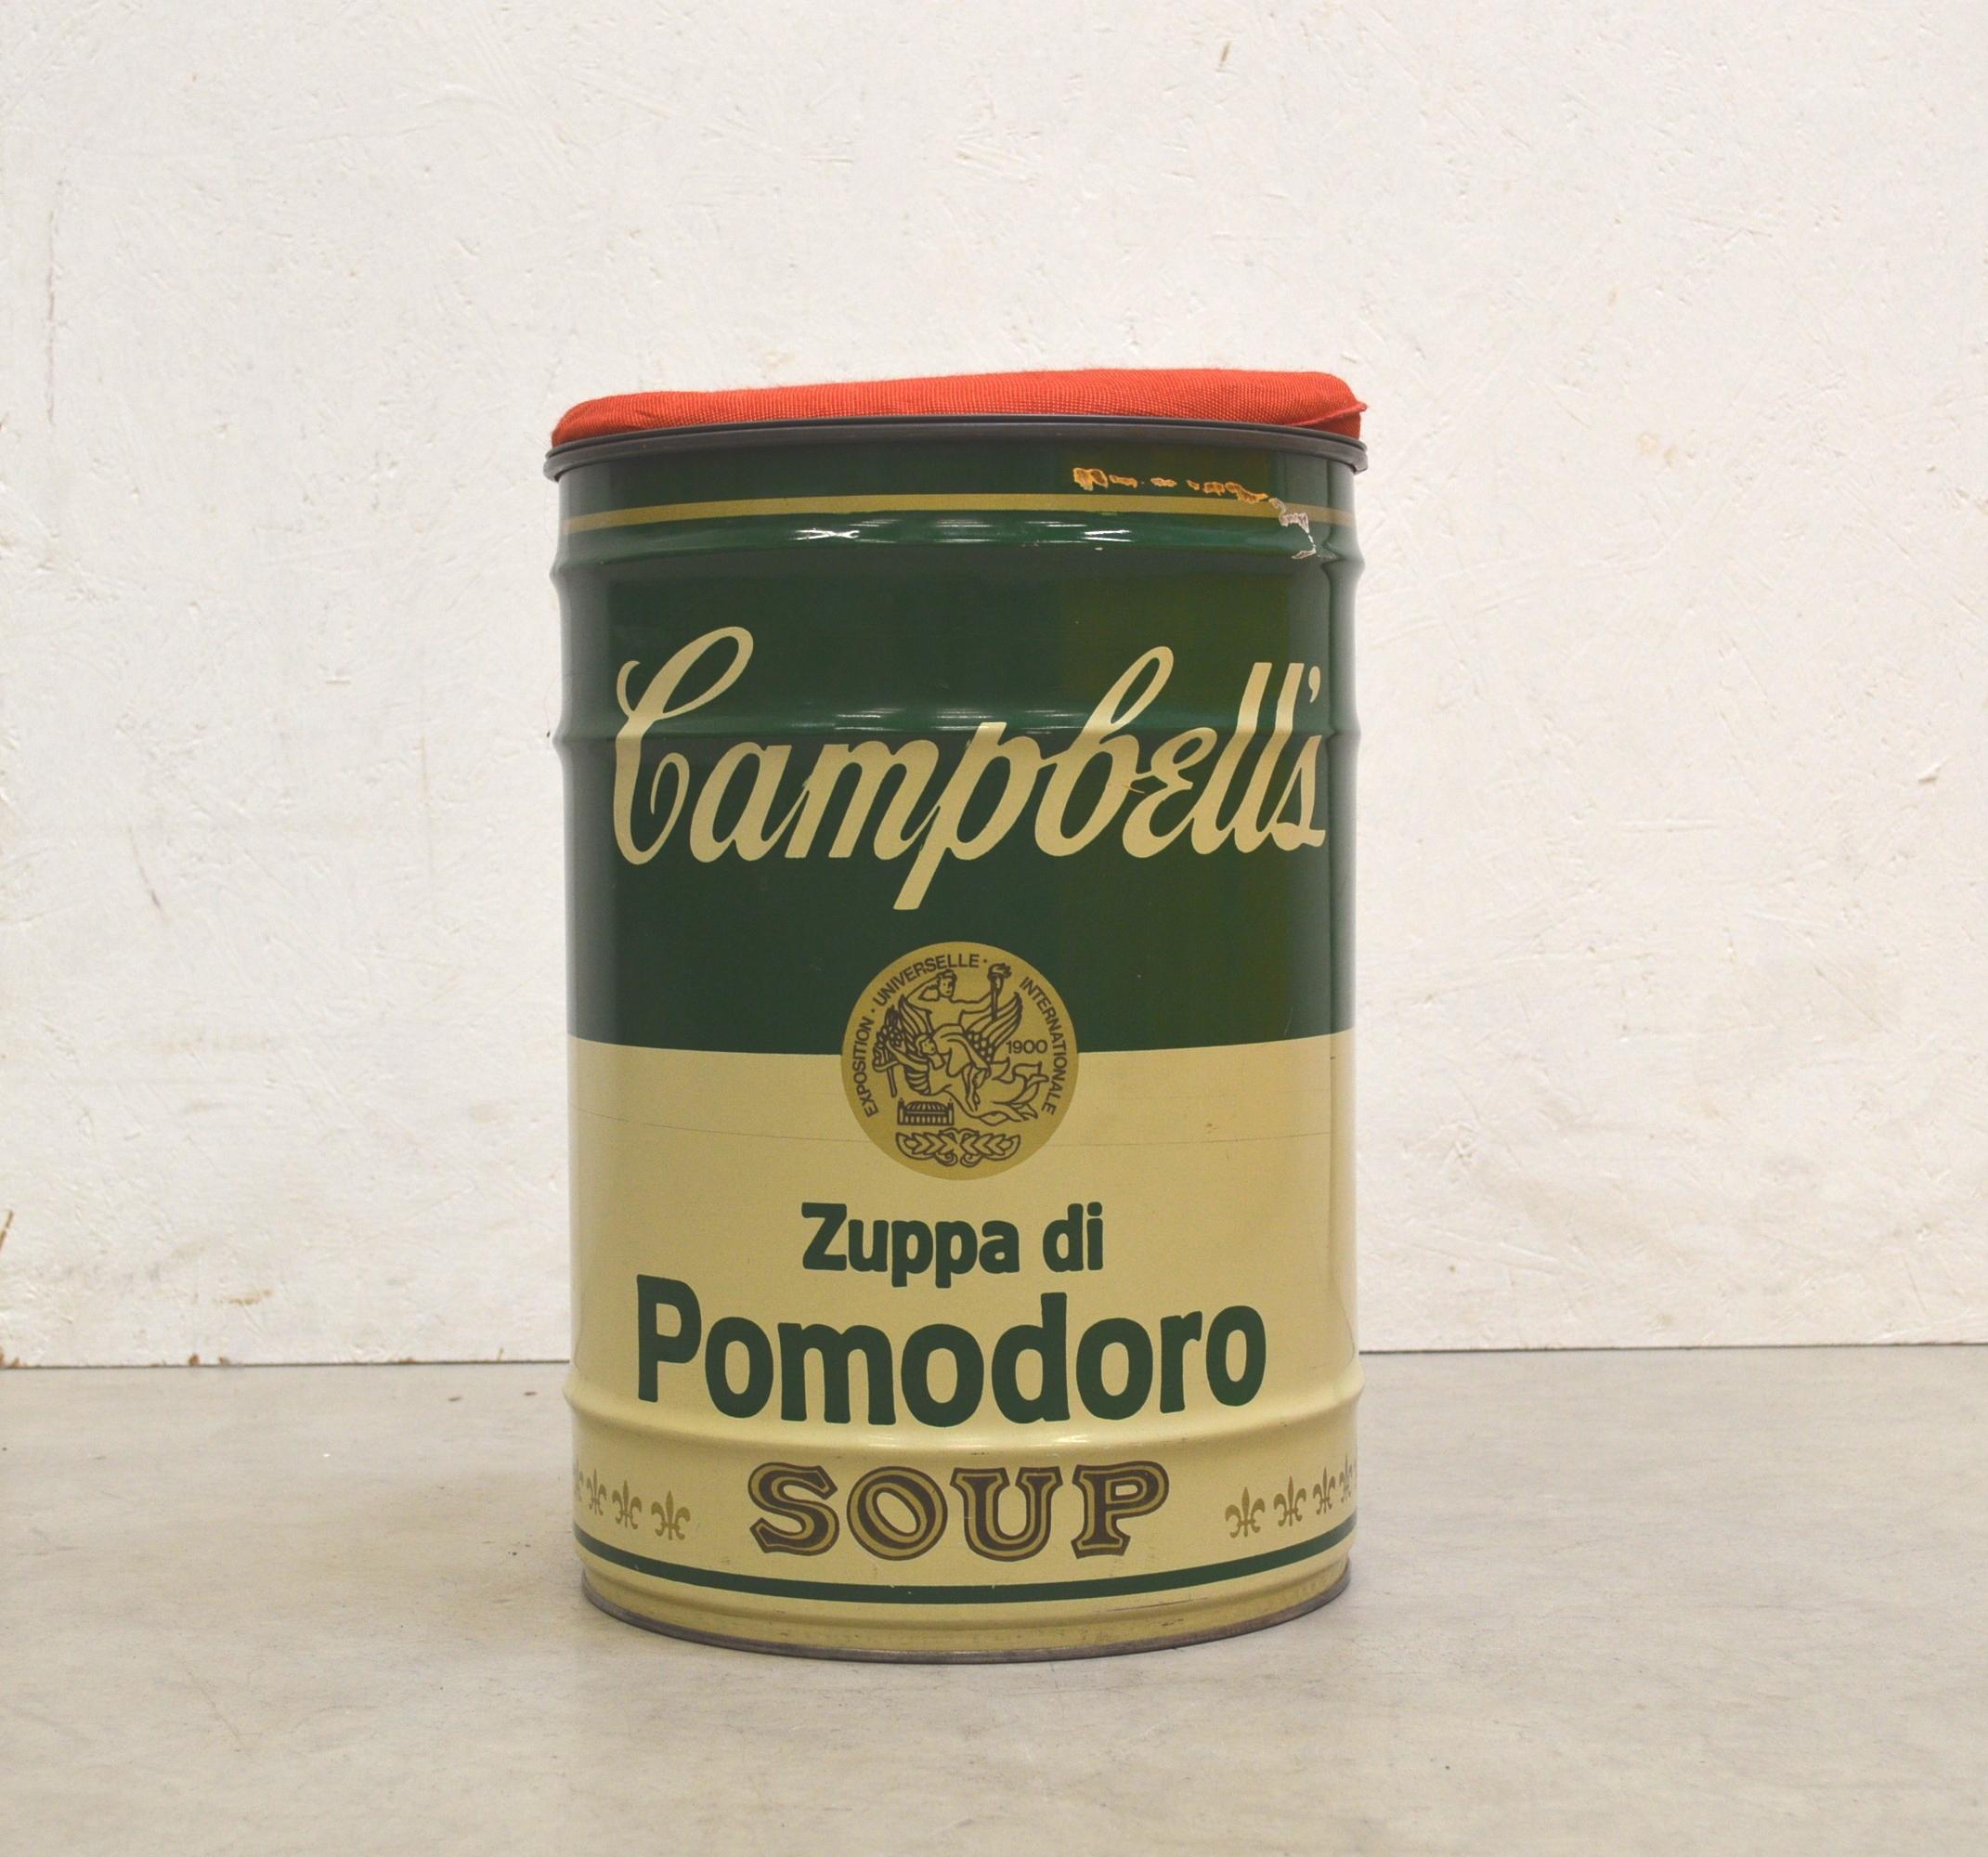 This rare stool was designed by Dino Gavina as a tribute to Andy Warhol and produced by Studio Simon in 1971 as part of the seminal Ultramobile Exhibition- Collection. 

The piece features the form of the Campbell can which was designed by Andy